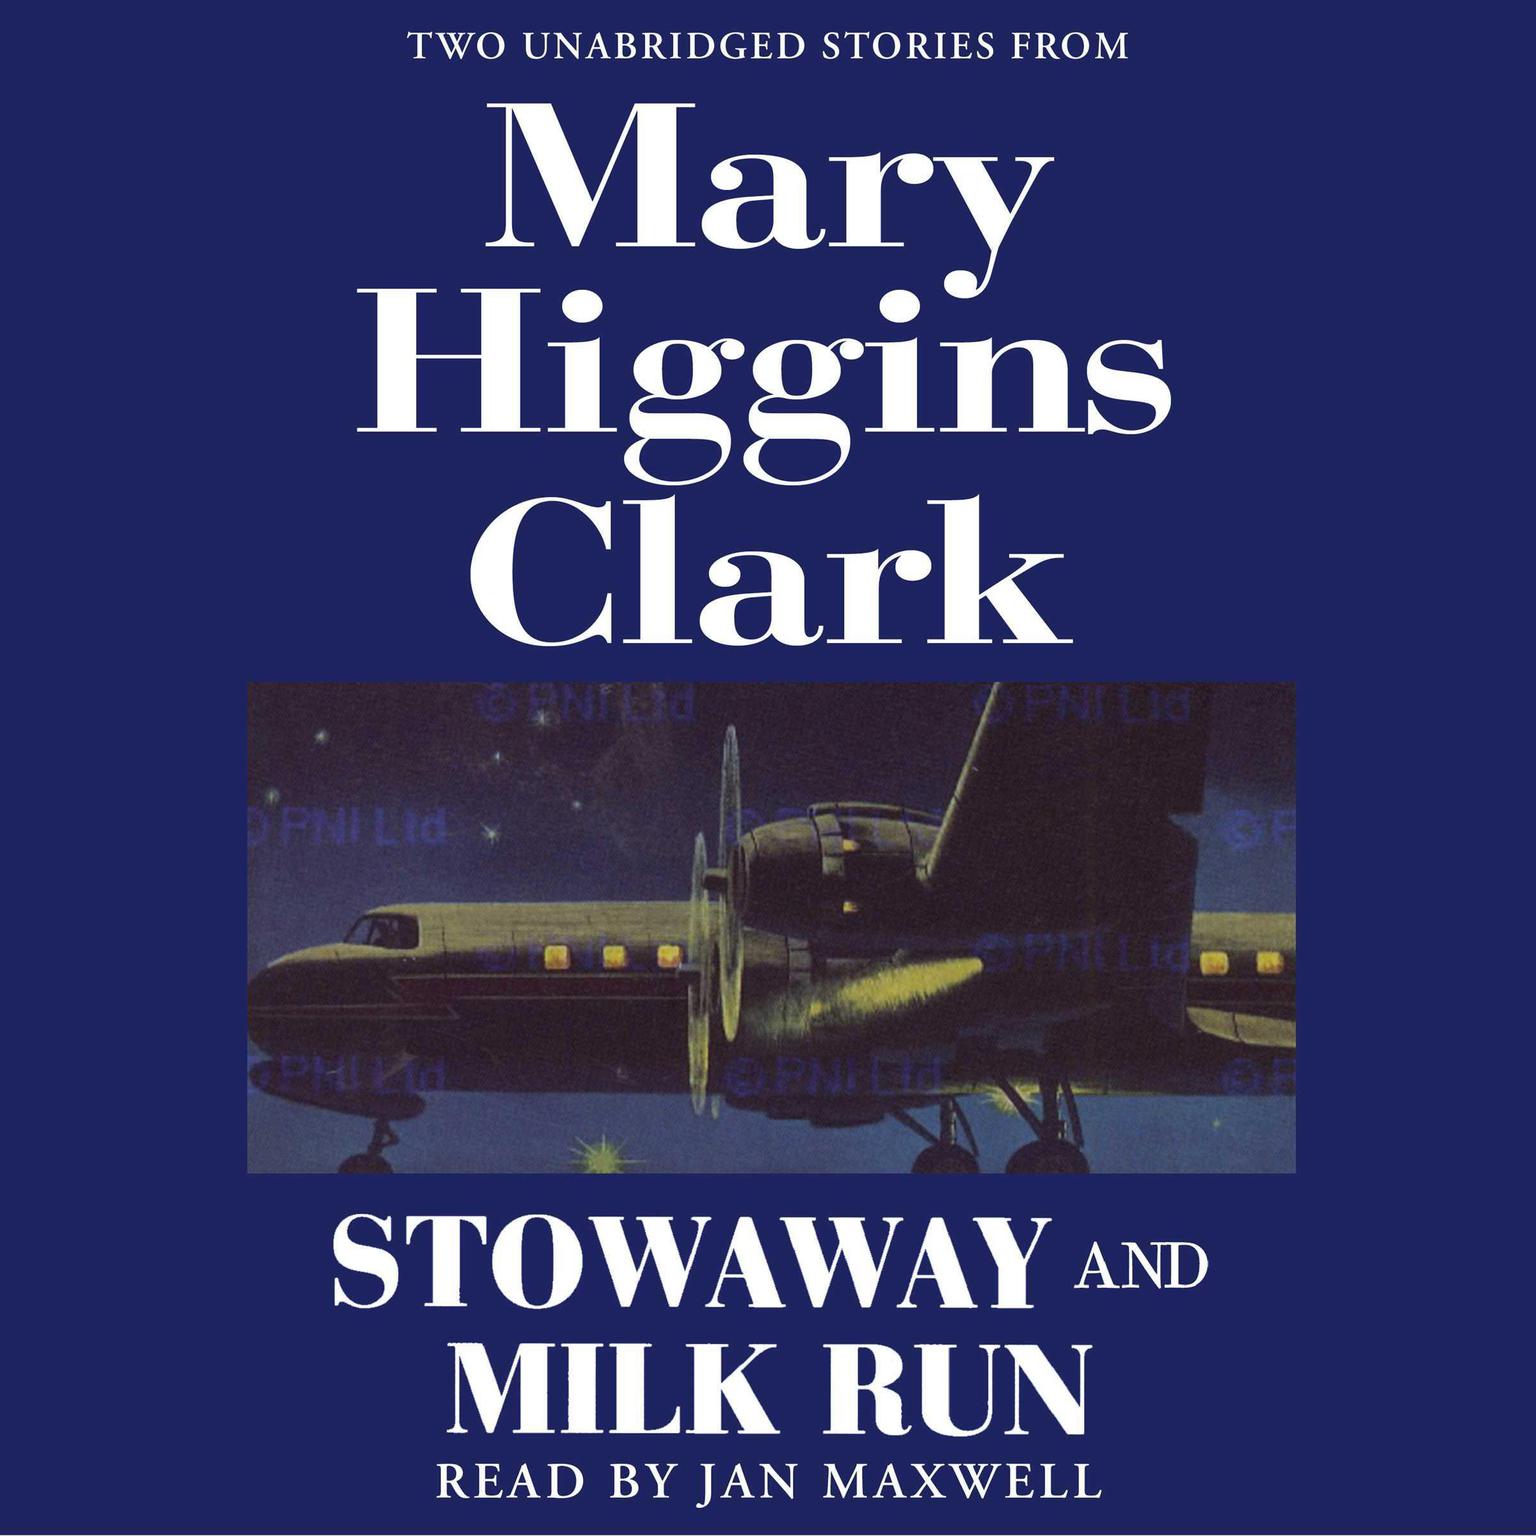 Stowaway and Milk Run (Abridged): Two Unabridged Stories From Mary Higgins Clark Audiobook, by Mary Higgins Clark